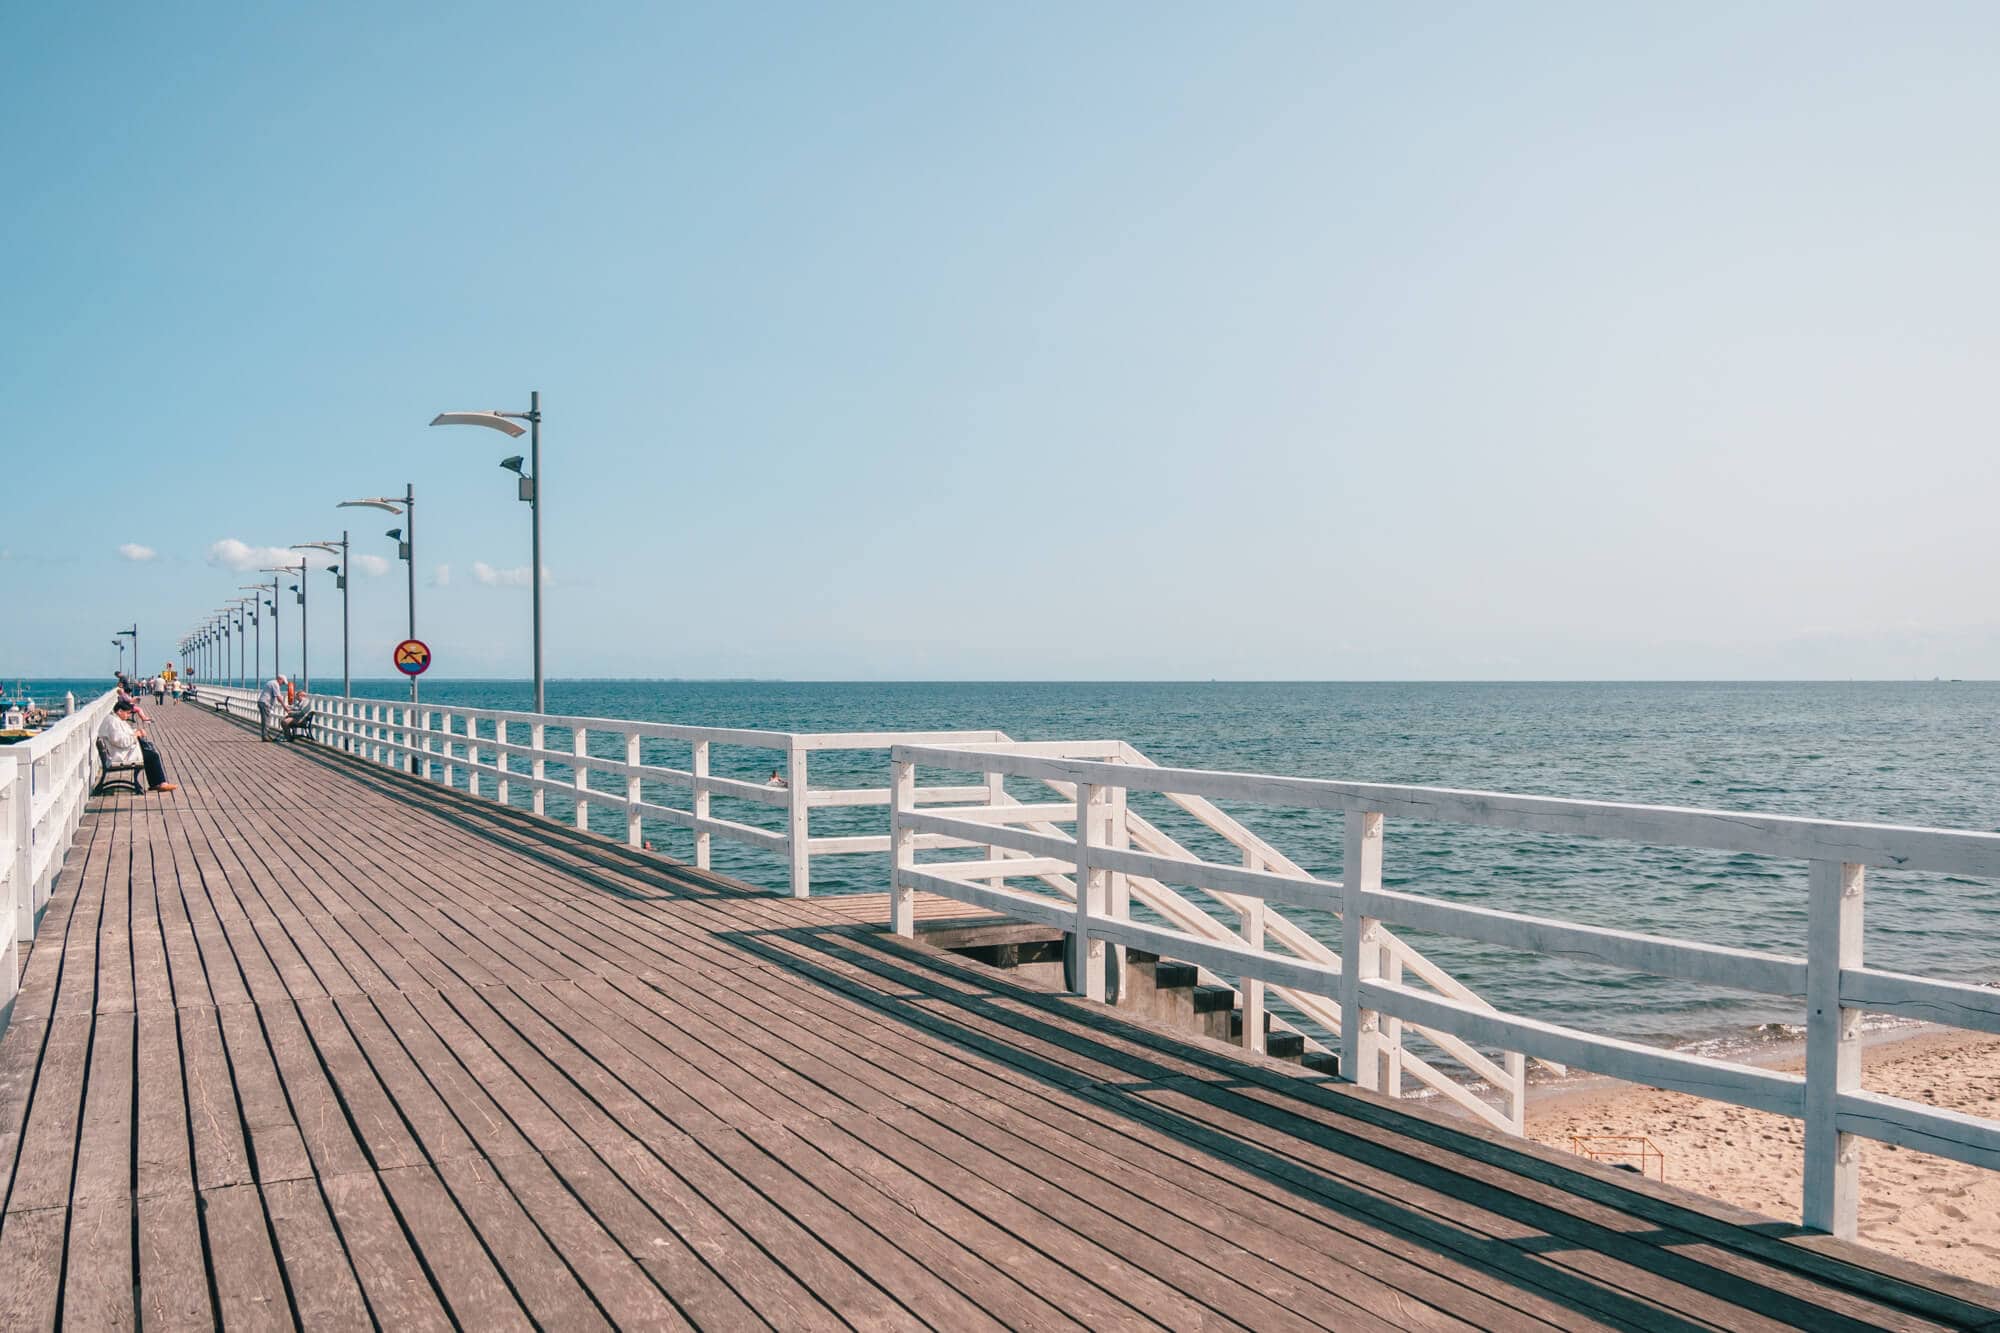 The famous Sopot Pier on a sunny day with blue skies, the perfect day trip from Gdansk.